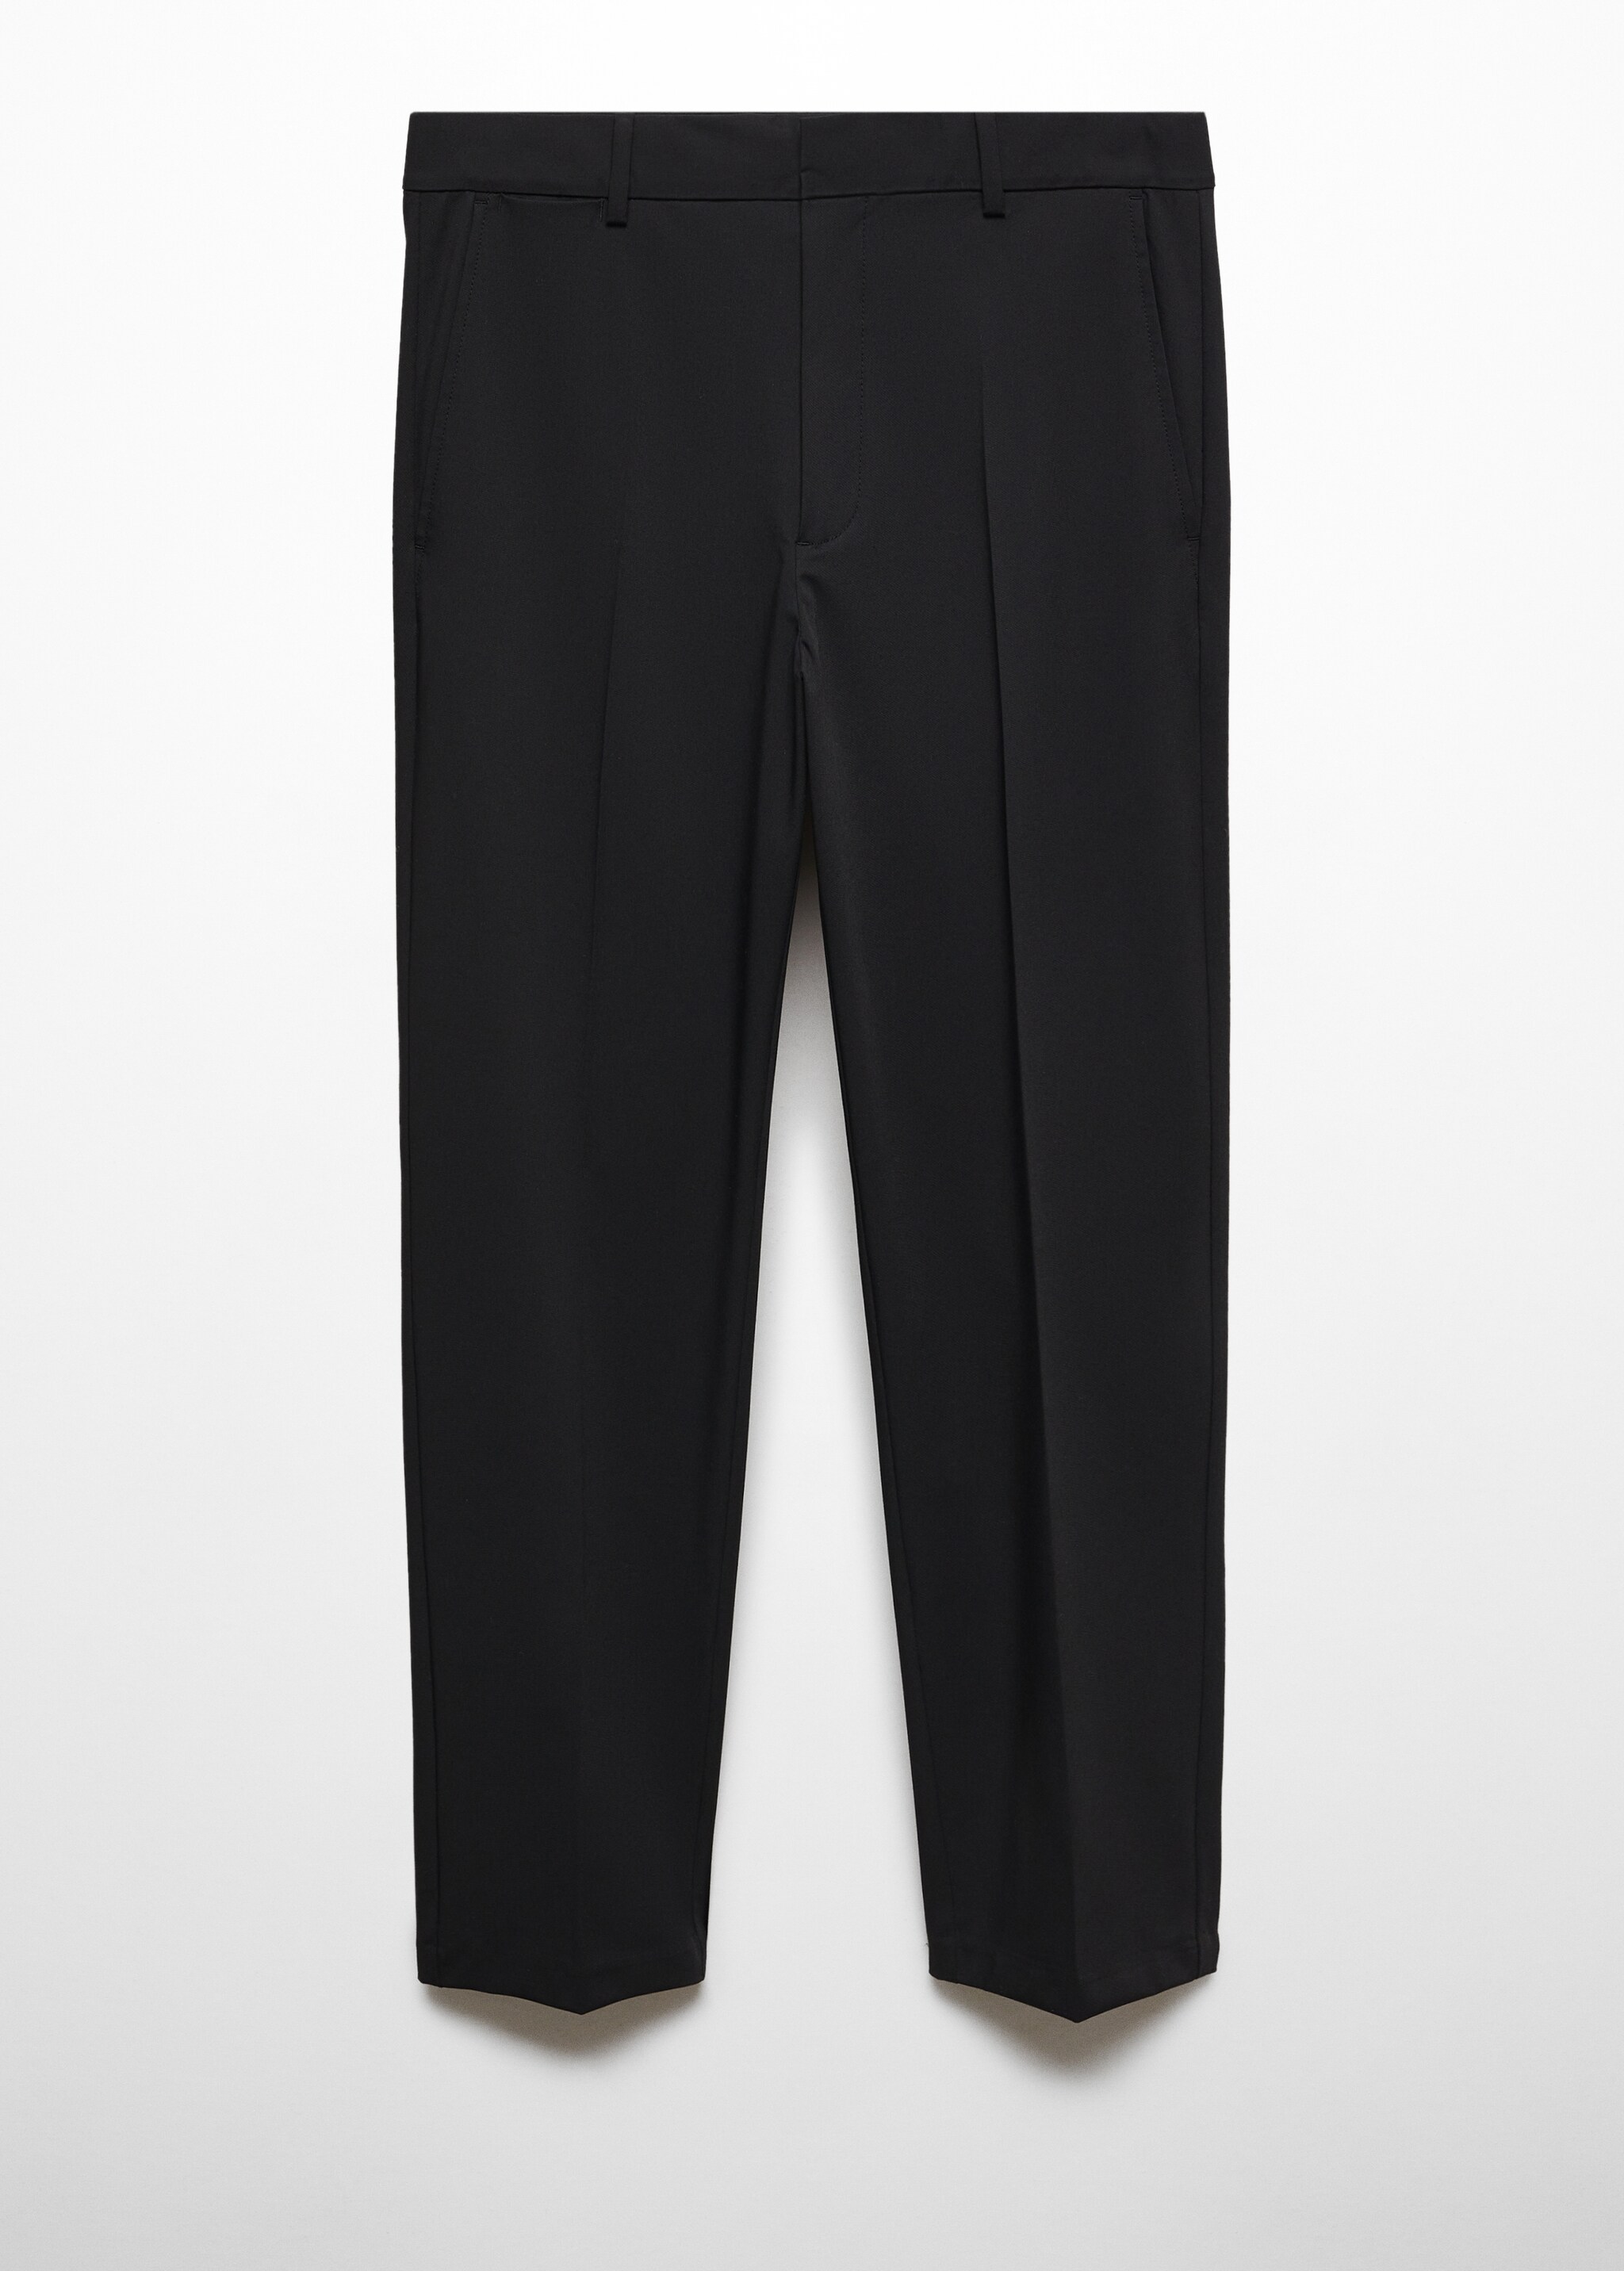 Slim fit stretch pants - Article without model